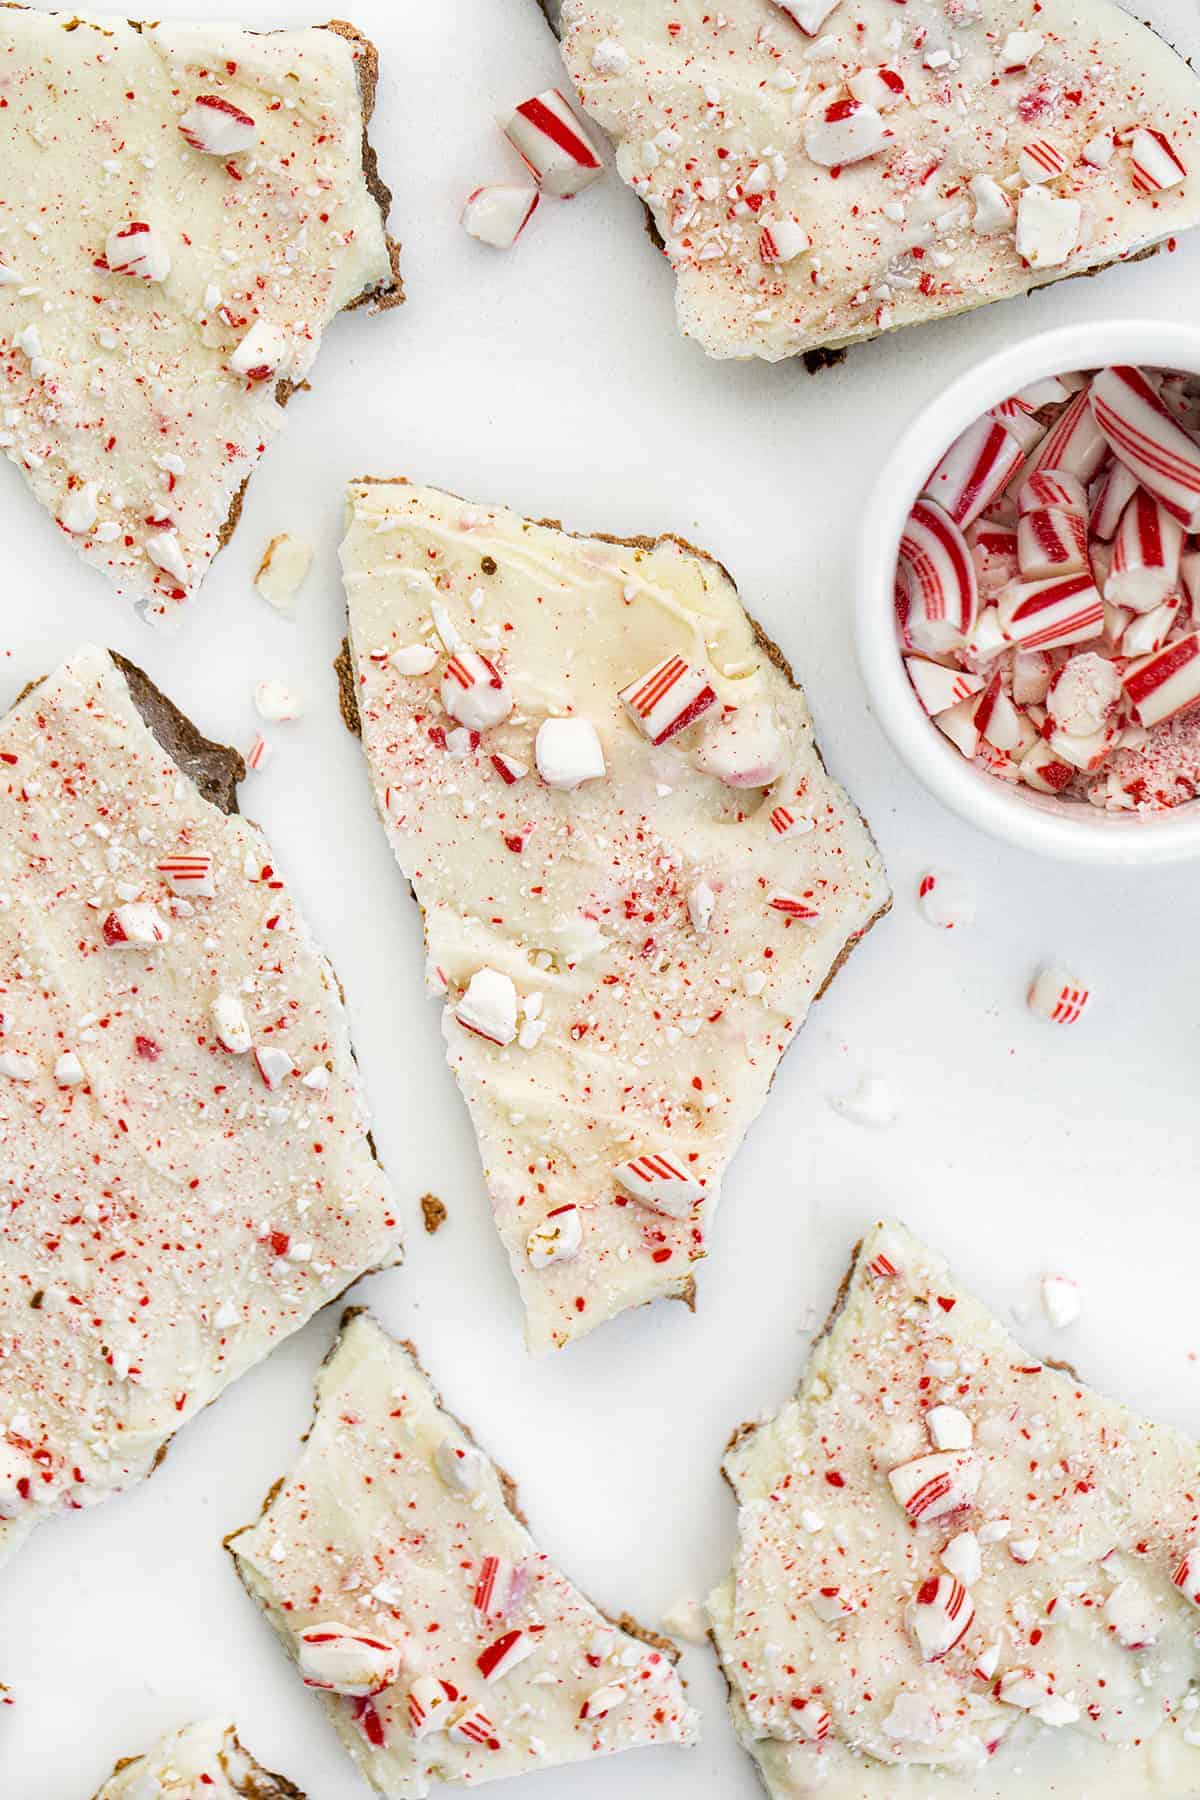 Overhead of Peppermint Bark with Broken Candy Canes